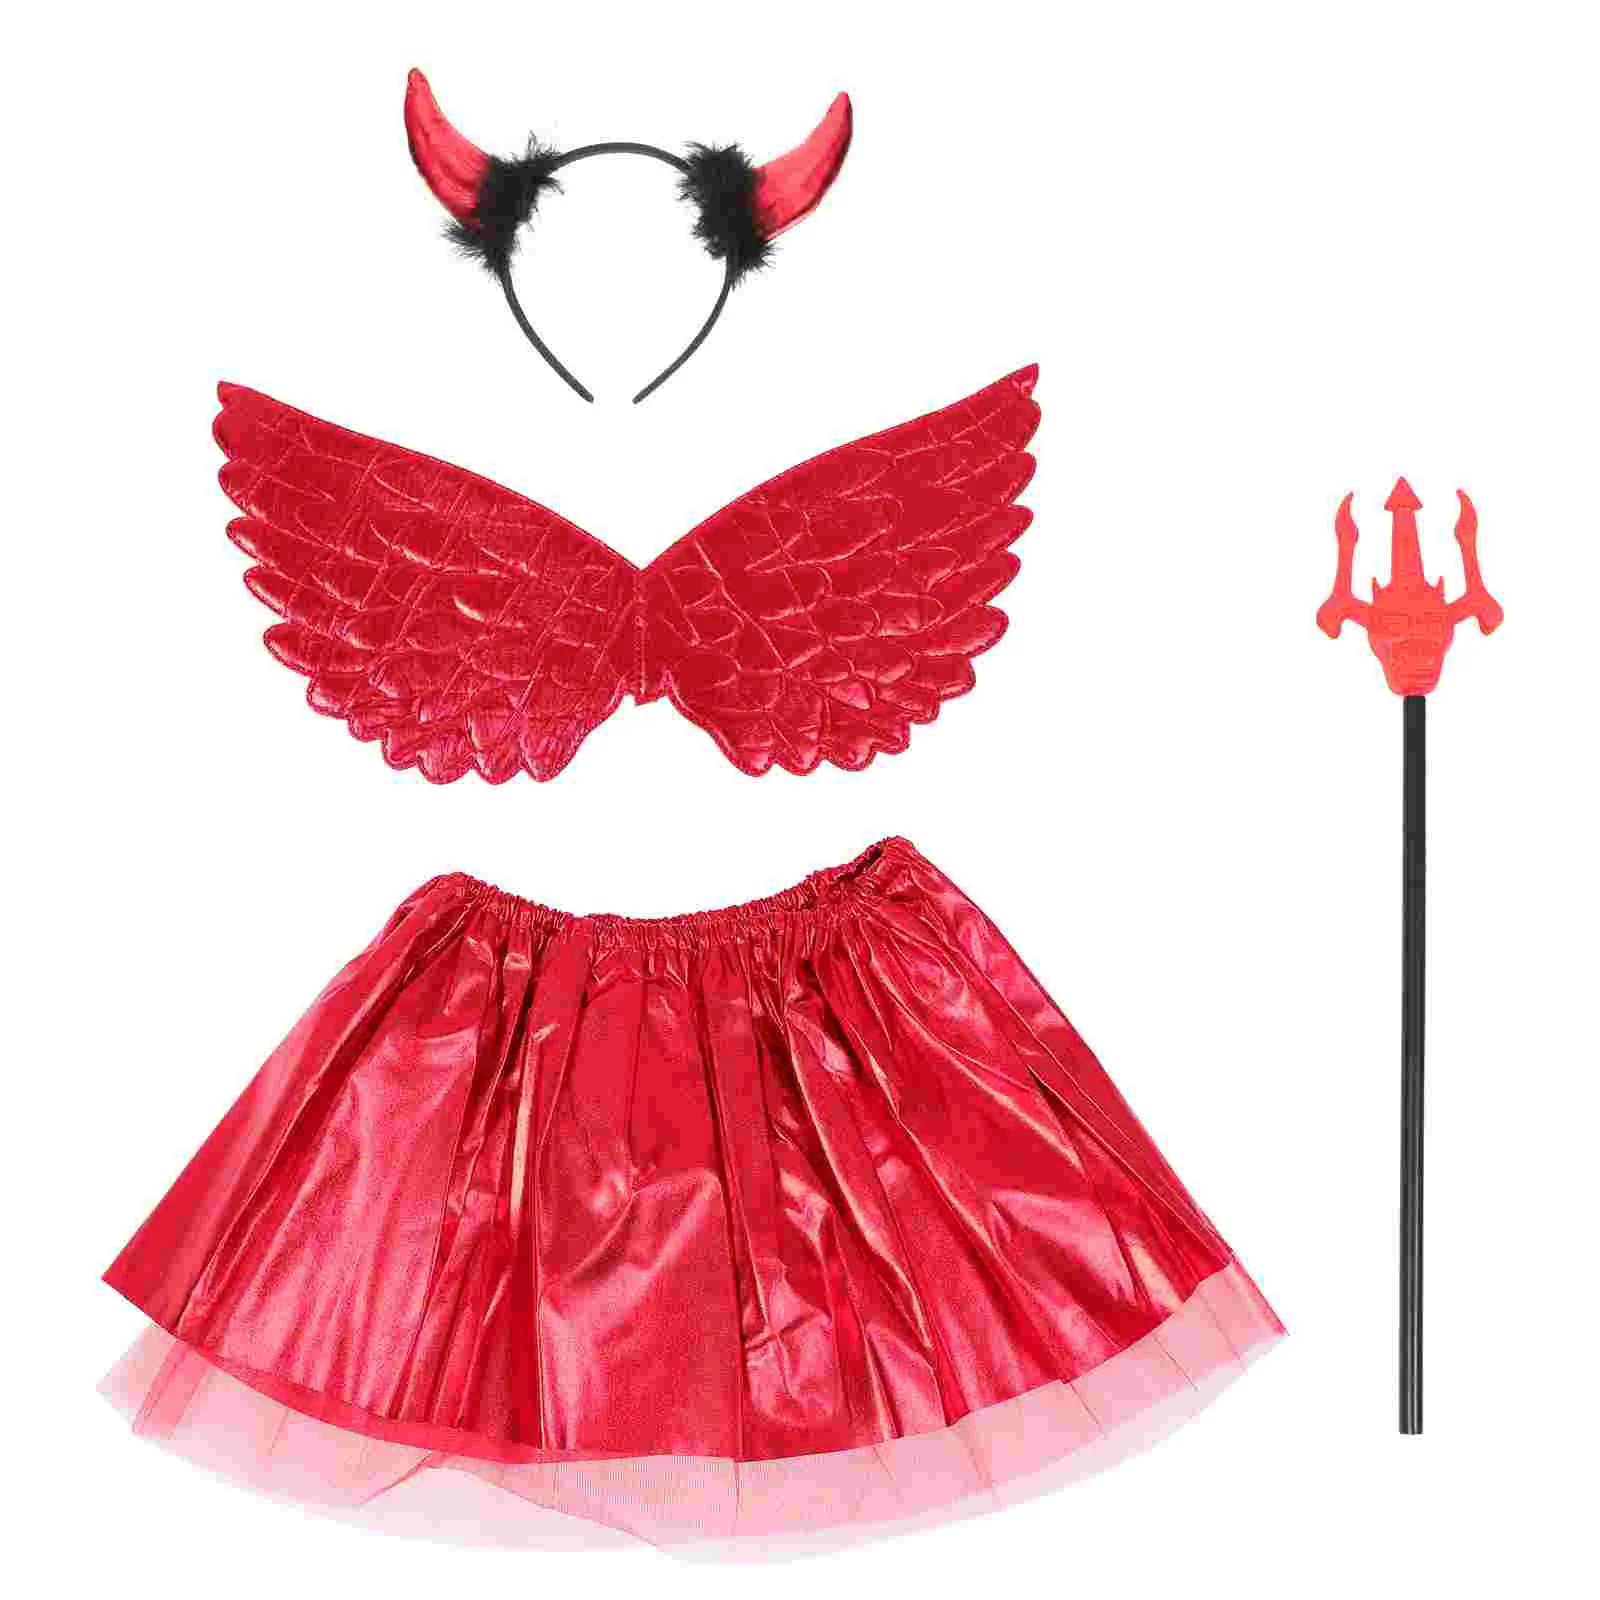 

Demon Wings Set Kids Girls Clothes Cosplay Suit Halloween Costume Decor Party Prop Plastic Supply Child Tool